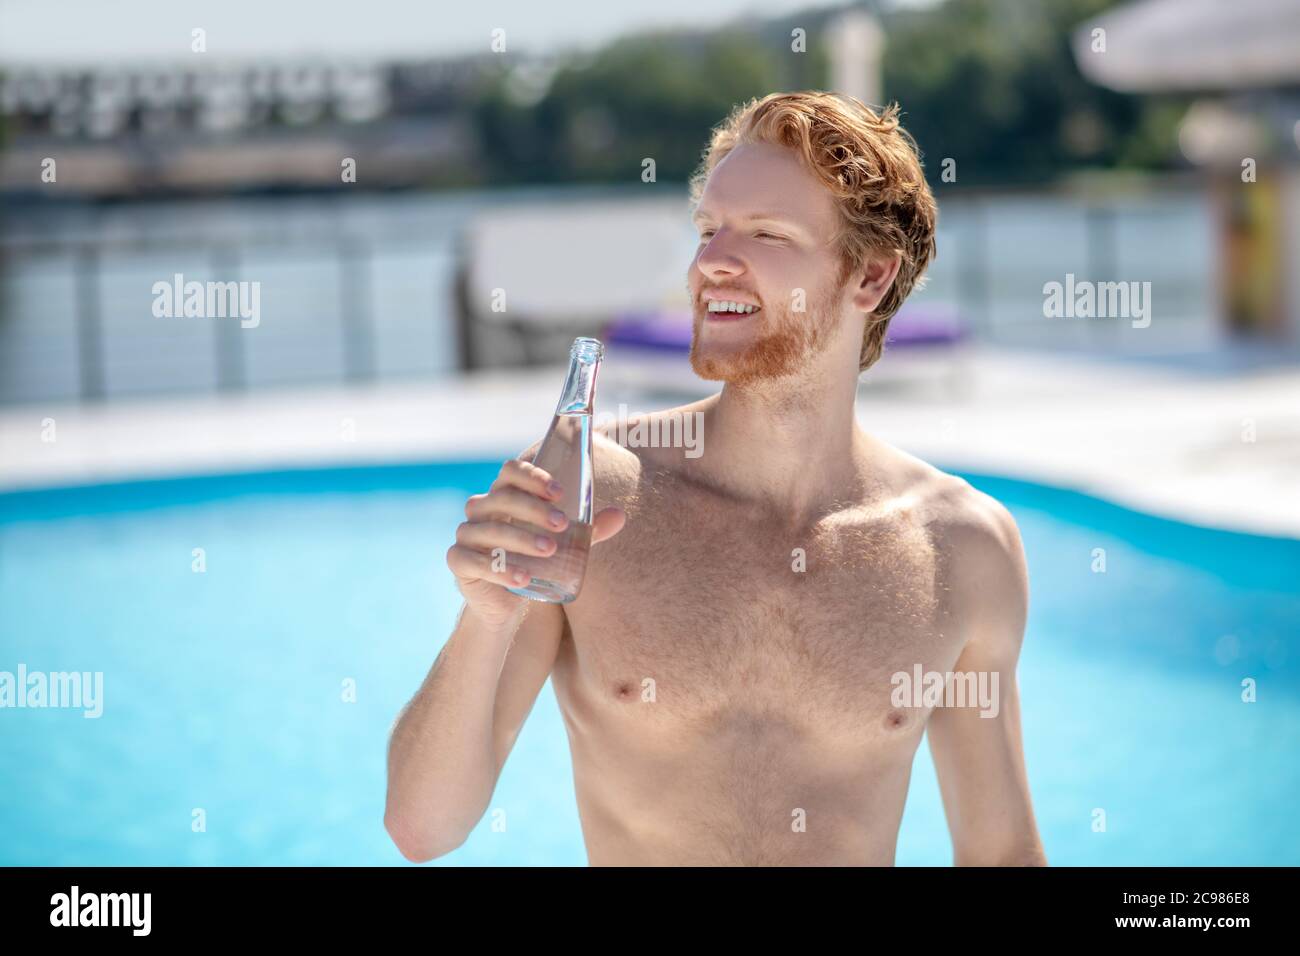 Man holding bottle of drinking water to his face Stock Photo